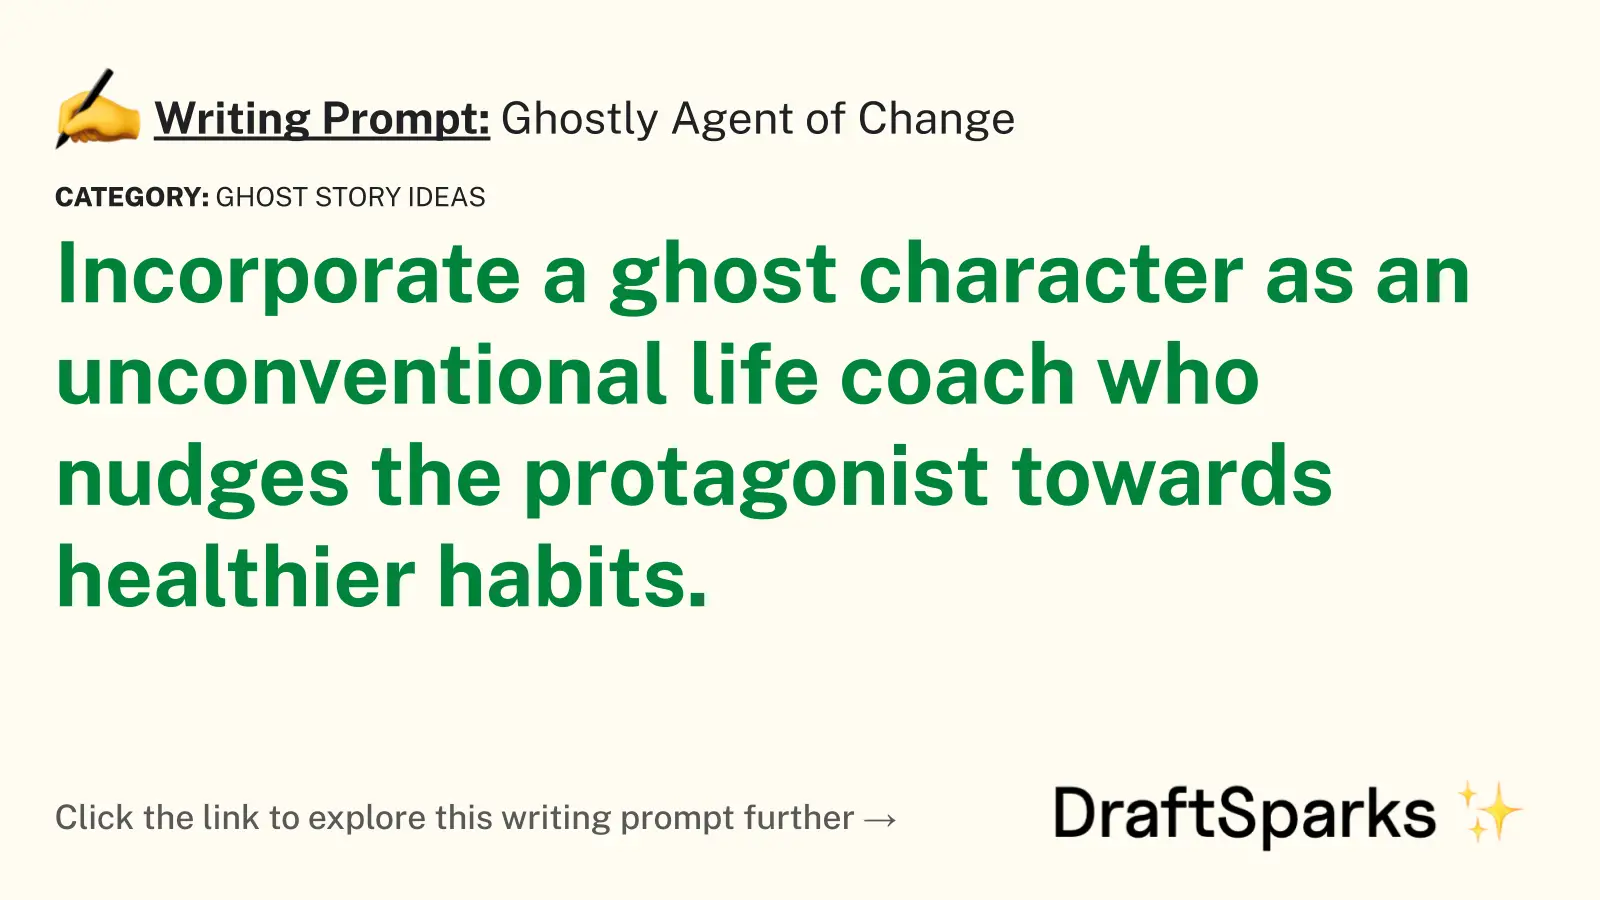 Ghostly Agent of Change